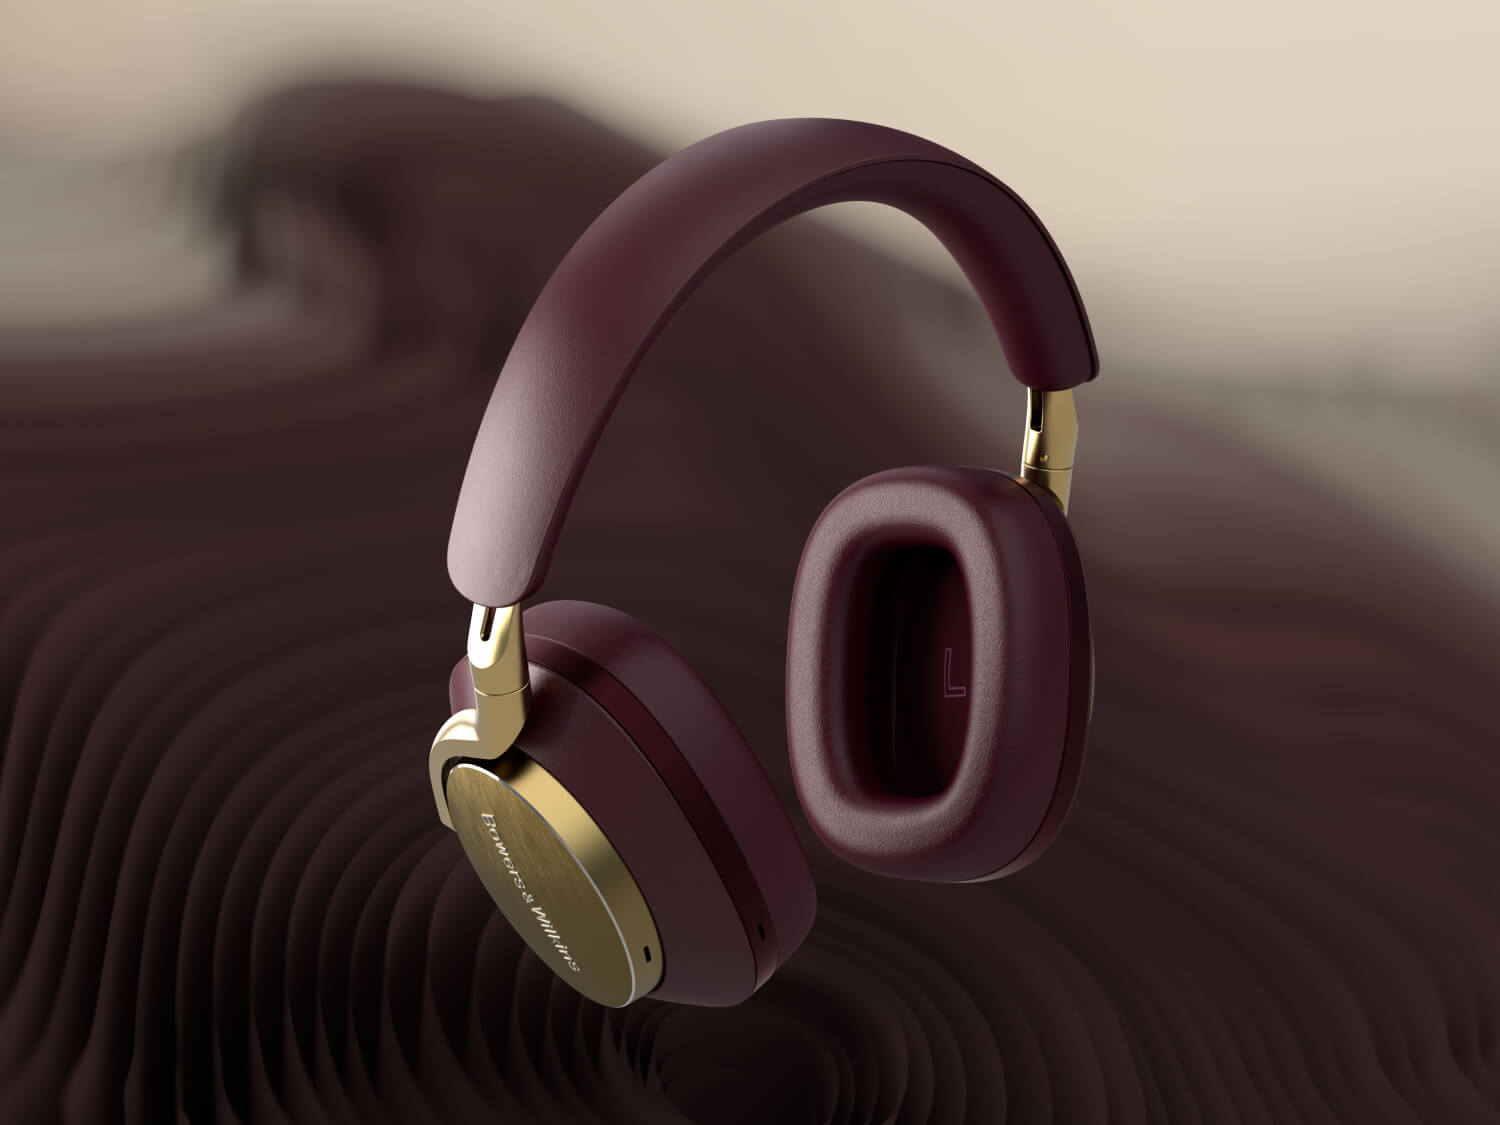 PX8 - A new reference in headphones